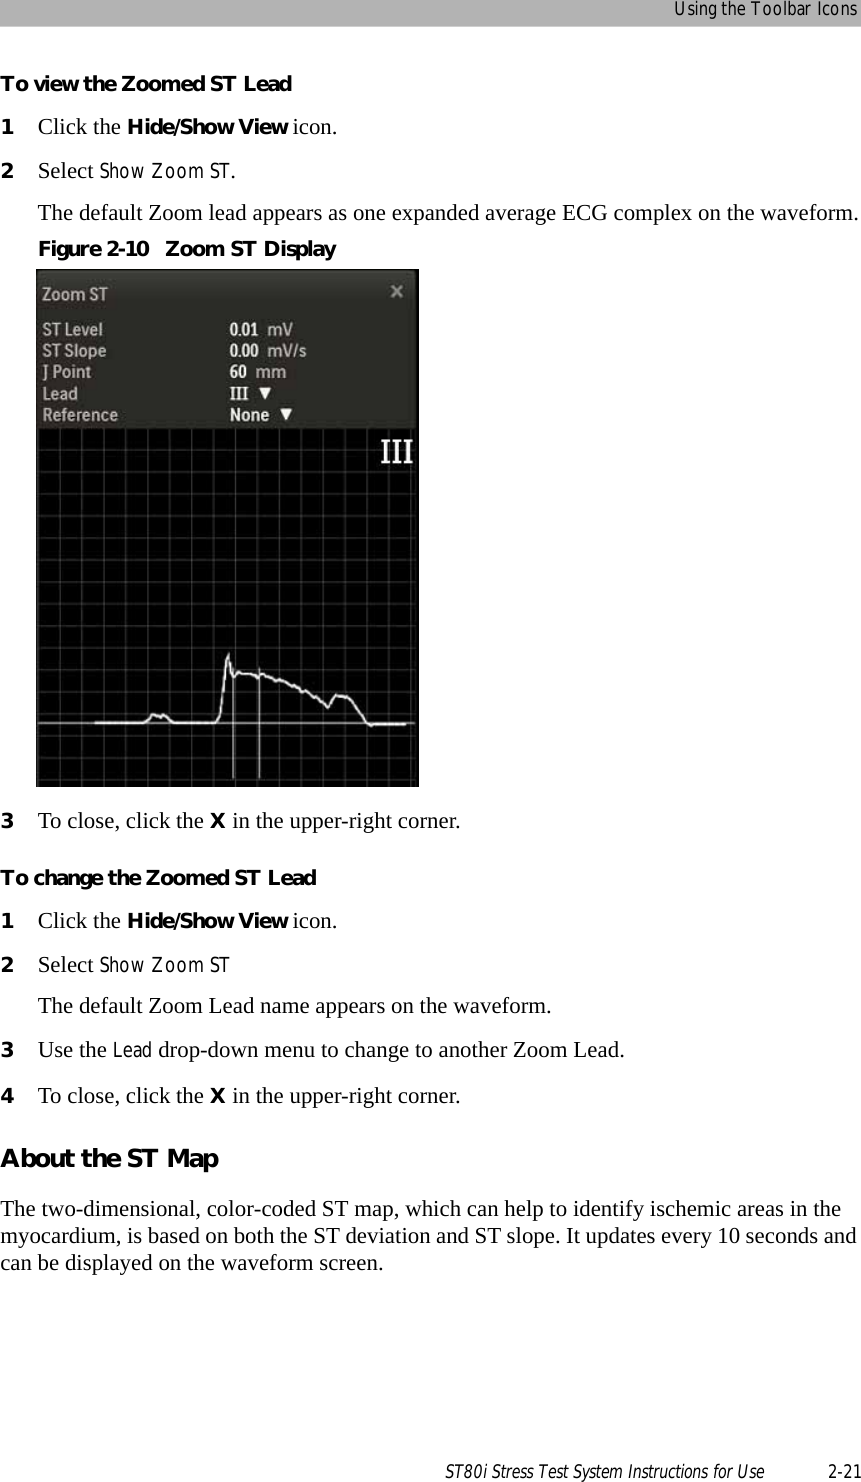 Using the Toolbar IconsST80i Stress Test System Instructions for Use 2-21To view the Zoomed ST Lead1Click the Hide/Show View icon.2Select Show Zoom ST.The default Zoom lead appears as one expanded average ECG complex on the waveform.Figure 2-10 Zoom ST Display3To close, click the X in the upper-right corner.To change the Zoomed ST Lead1Click the Hide/Show View icon.2Select Show Zoom STThe default Zoom Lead name appears on the waveform.3Use the Lead drop-down menu to change to another Zoom Lead.4To close, click the X in the upper-right corner.About the ST MapThe two-dimensional, color-coded ST map, which can help to identify ischemic areas in the myocardium, is based on both the ST deviation and ST slope. It updates every 10 seconds and can be displayed on the waveform screen.